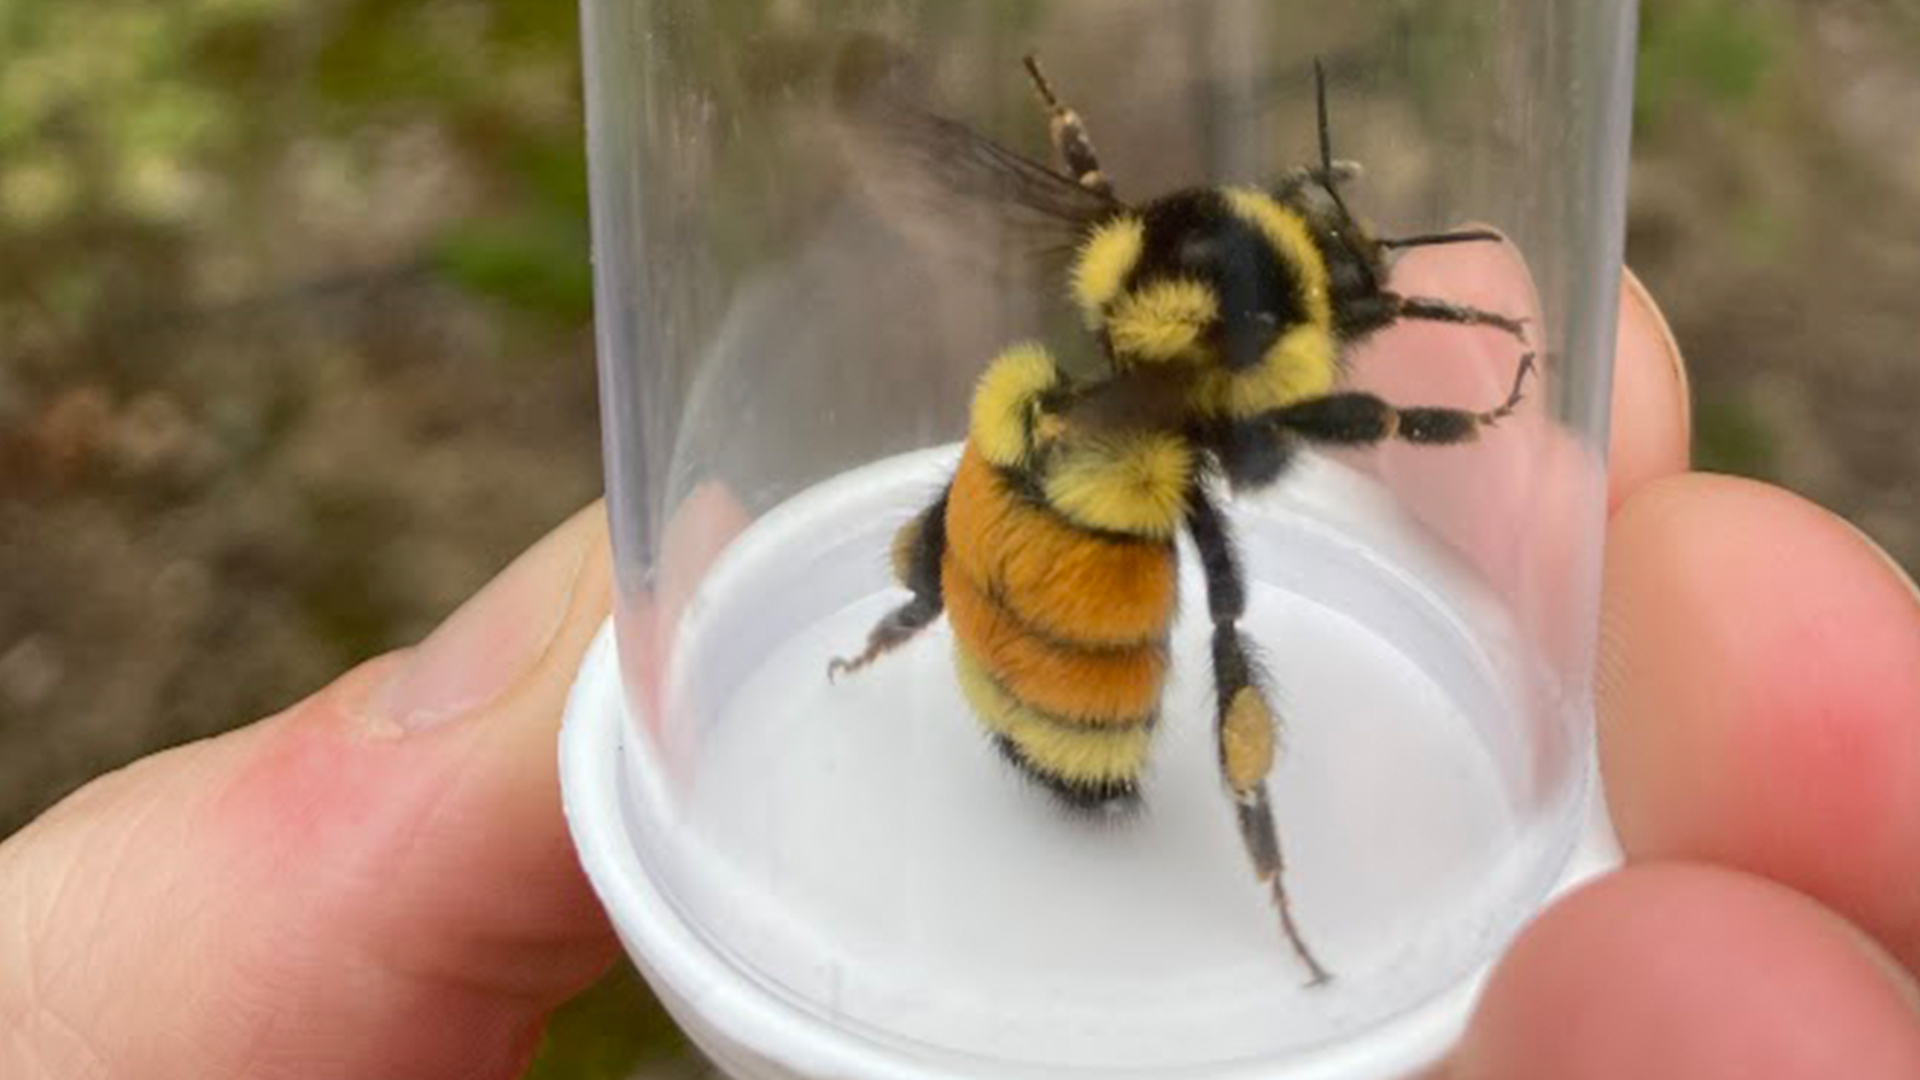 A large bee in a collection vial